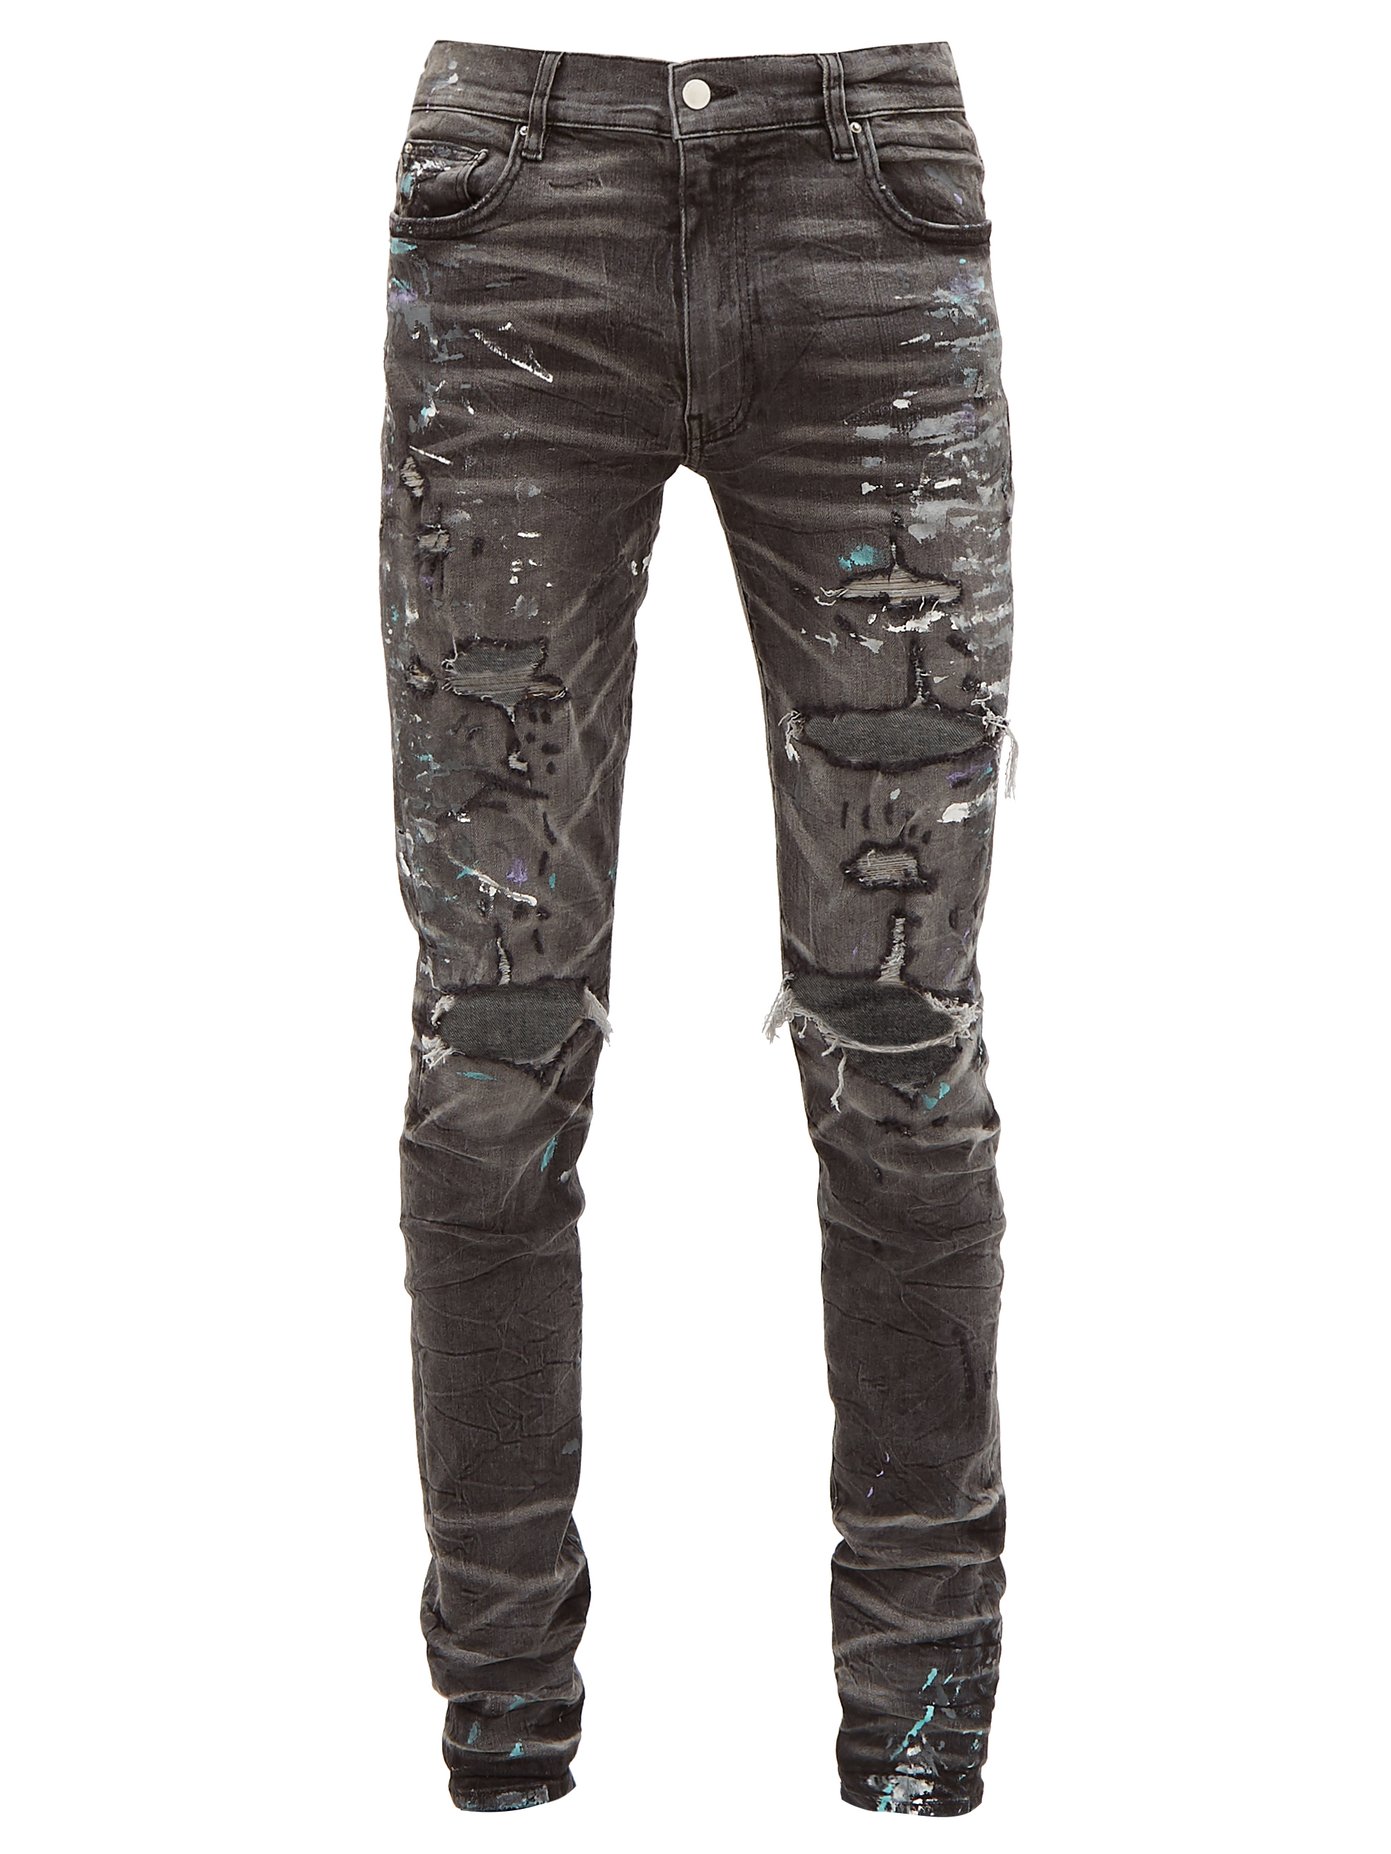 distressed paint jeans